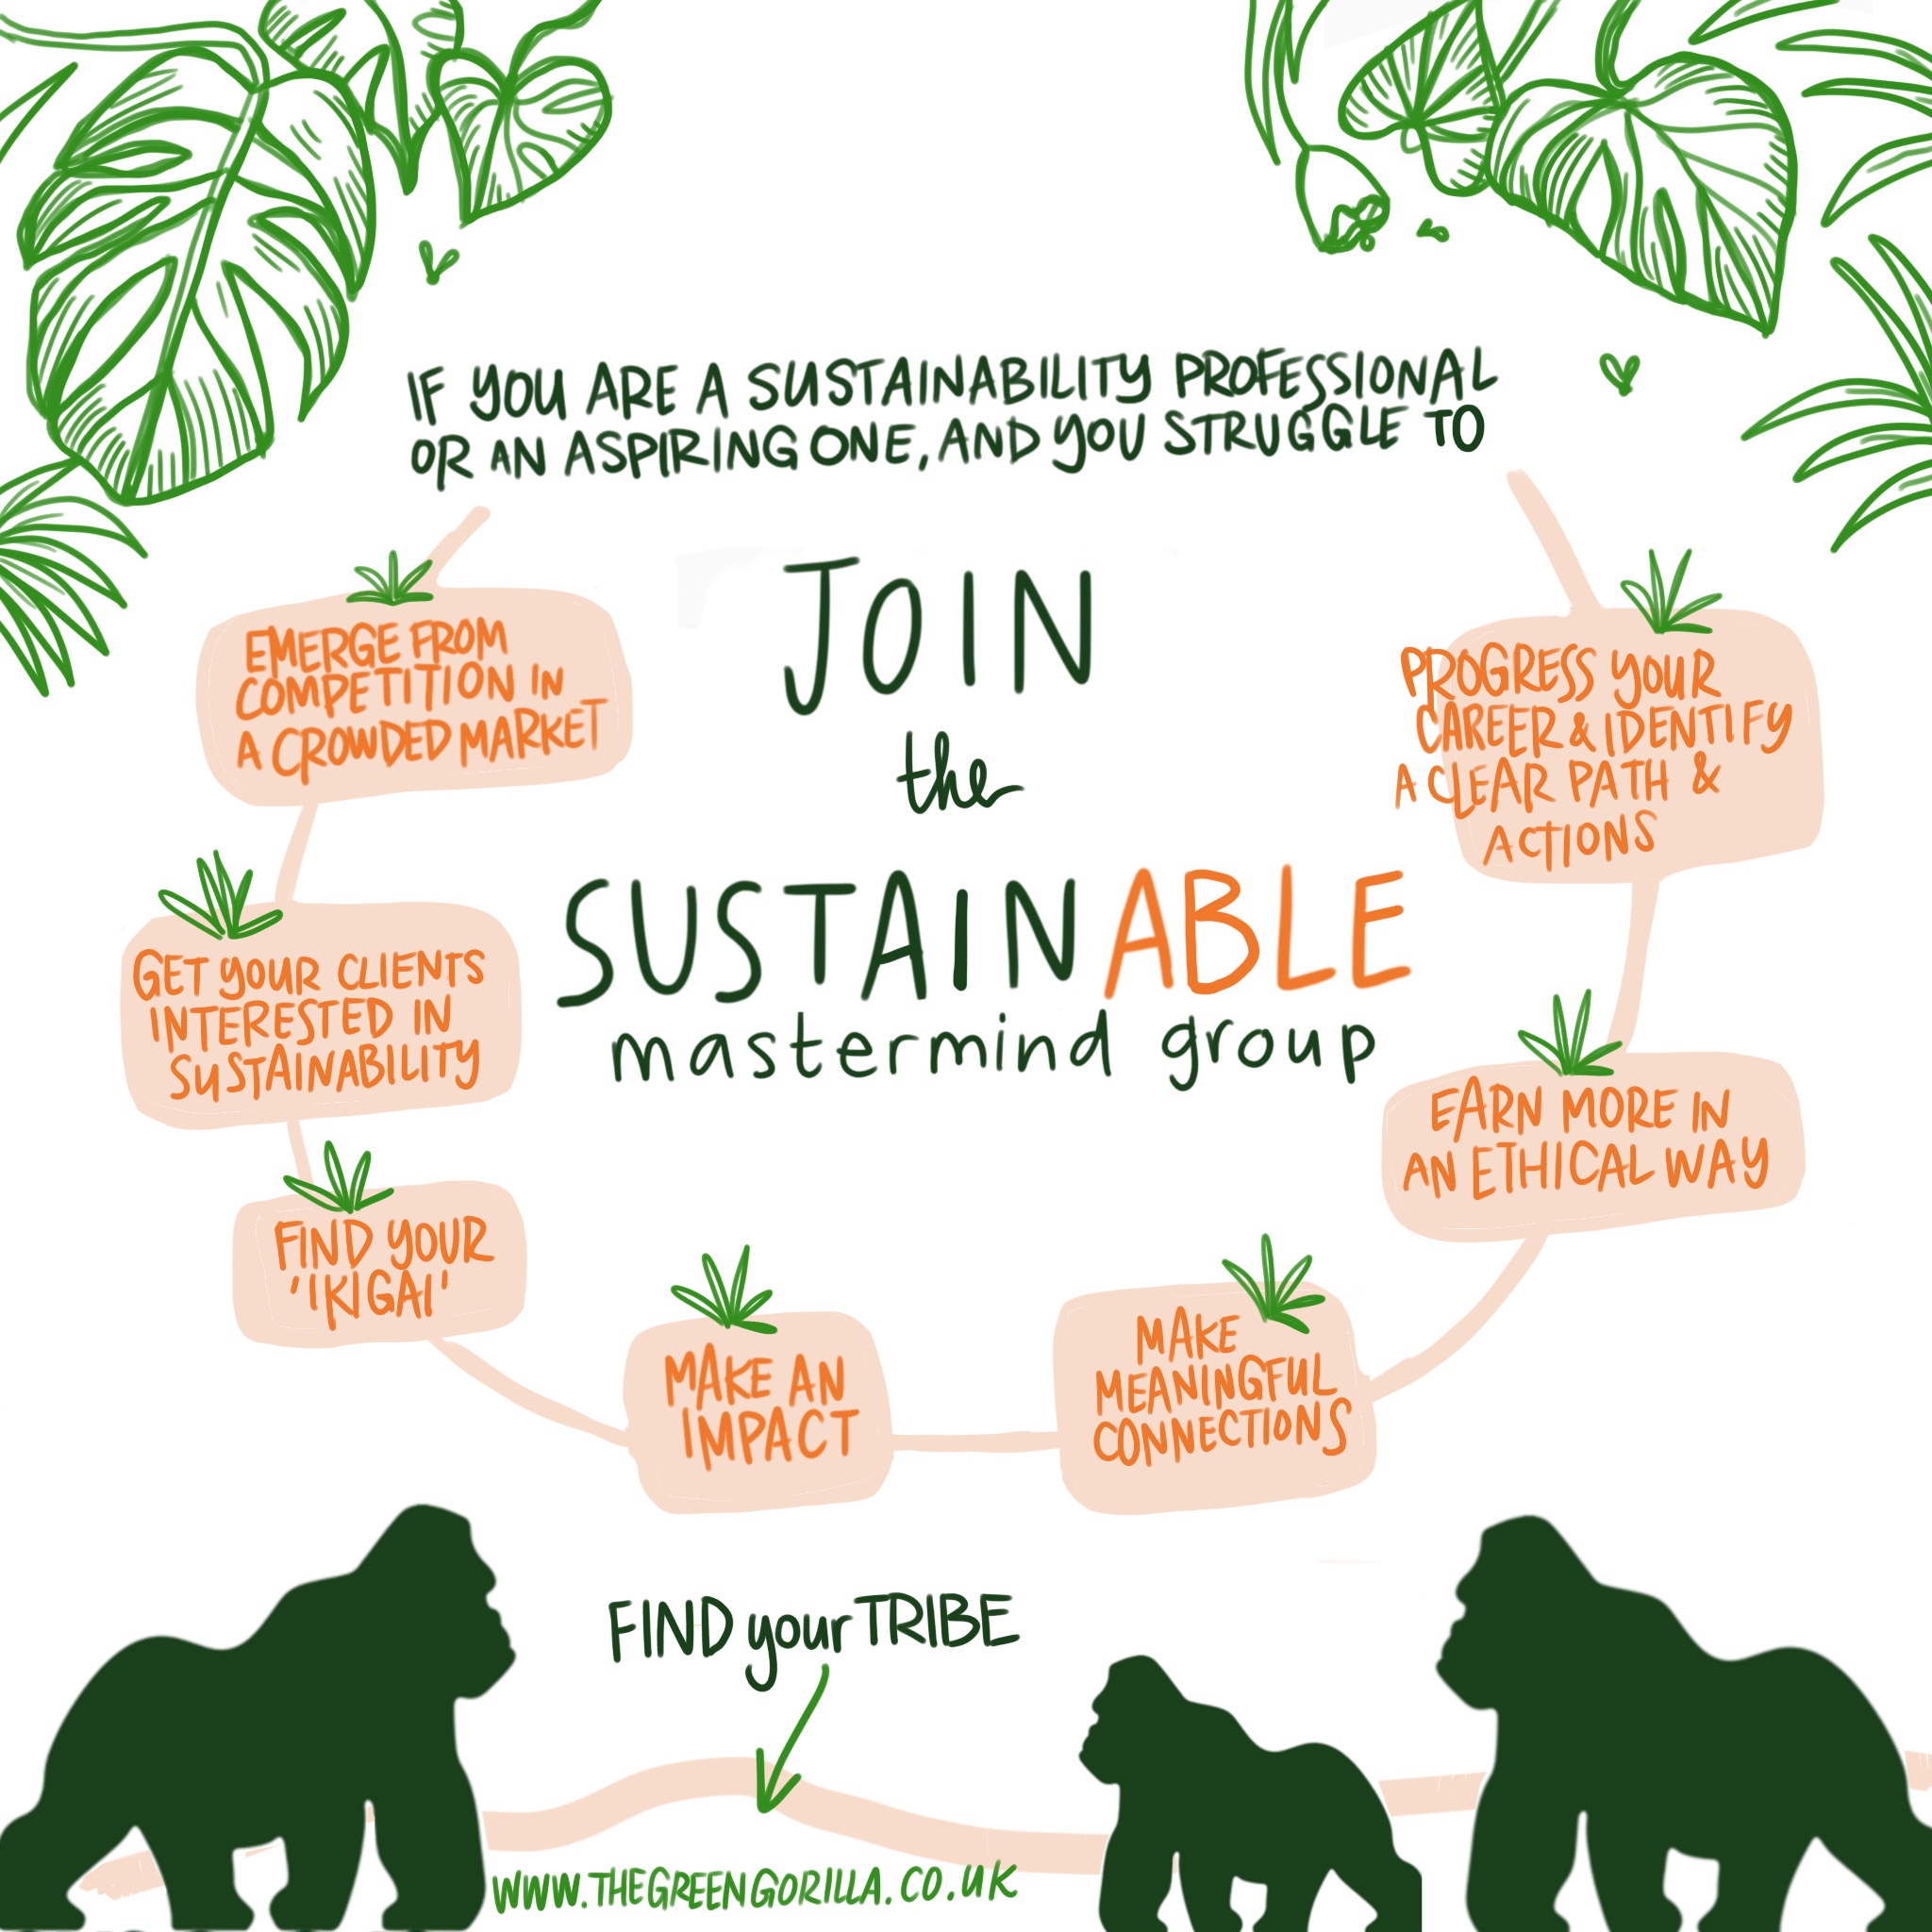 Your Invitation to Join the SustainABLE Mastermind